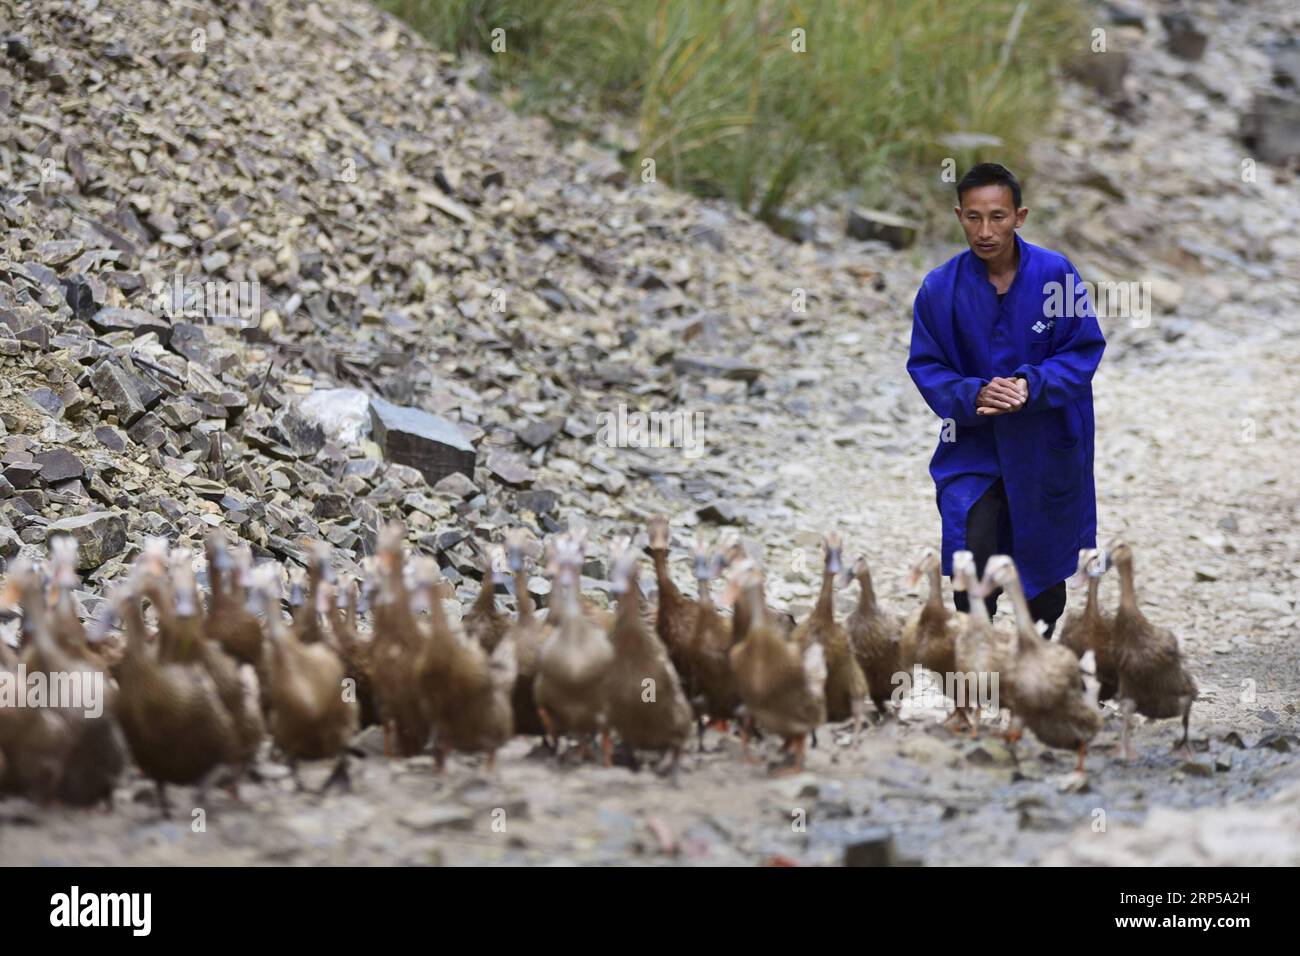 (181205) -- DANZHAI, Dec. 5, 2018 (Xinhua) -- Yang Zaiheng herds ducks at an egg-laying duck farm in Dingdong Village of Danzhai County, Qiandongnan Miao and Dong Autonomous Prefecture, southwest China s Guizhou Province, Dec. 4, 2018. Duck farmer Yang Zaiheng, 42, was once impoverished. After getting rid of poverty in 2015 through livestock and fish farming, Yang decided to promote the breeding industry in local area and help other impoverished households increase income. In 2017, Yang and other six households set up an egg-laying duck breeding cooperative with a duck egg production of over 8 Stock Photo